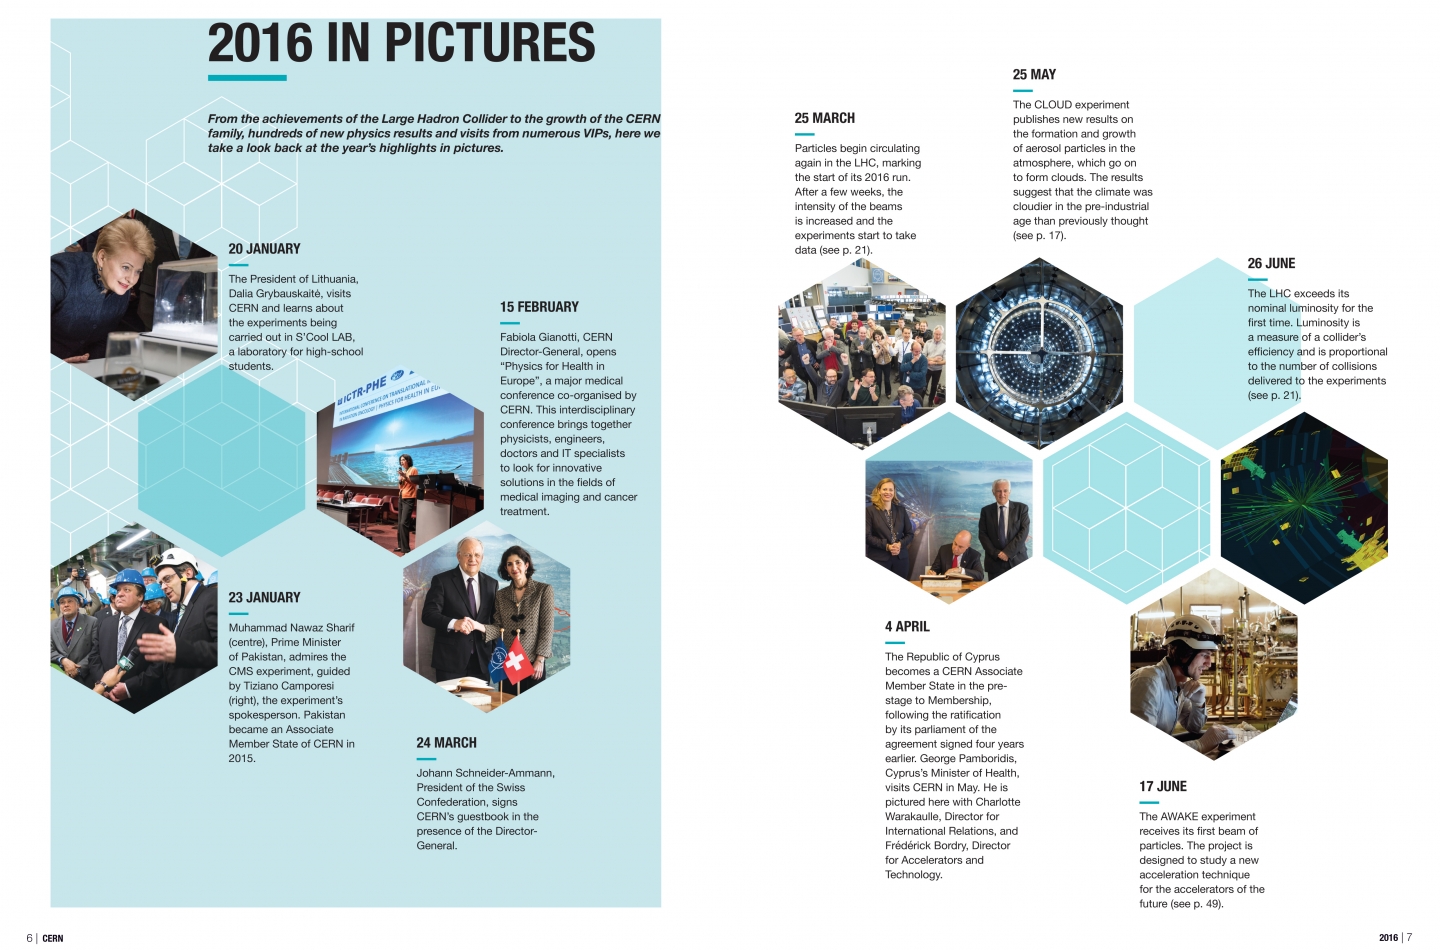 The new Annual Report is available